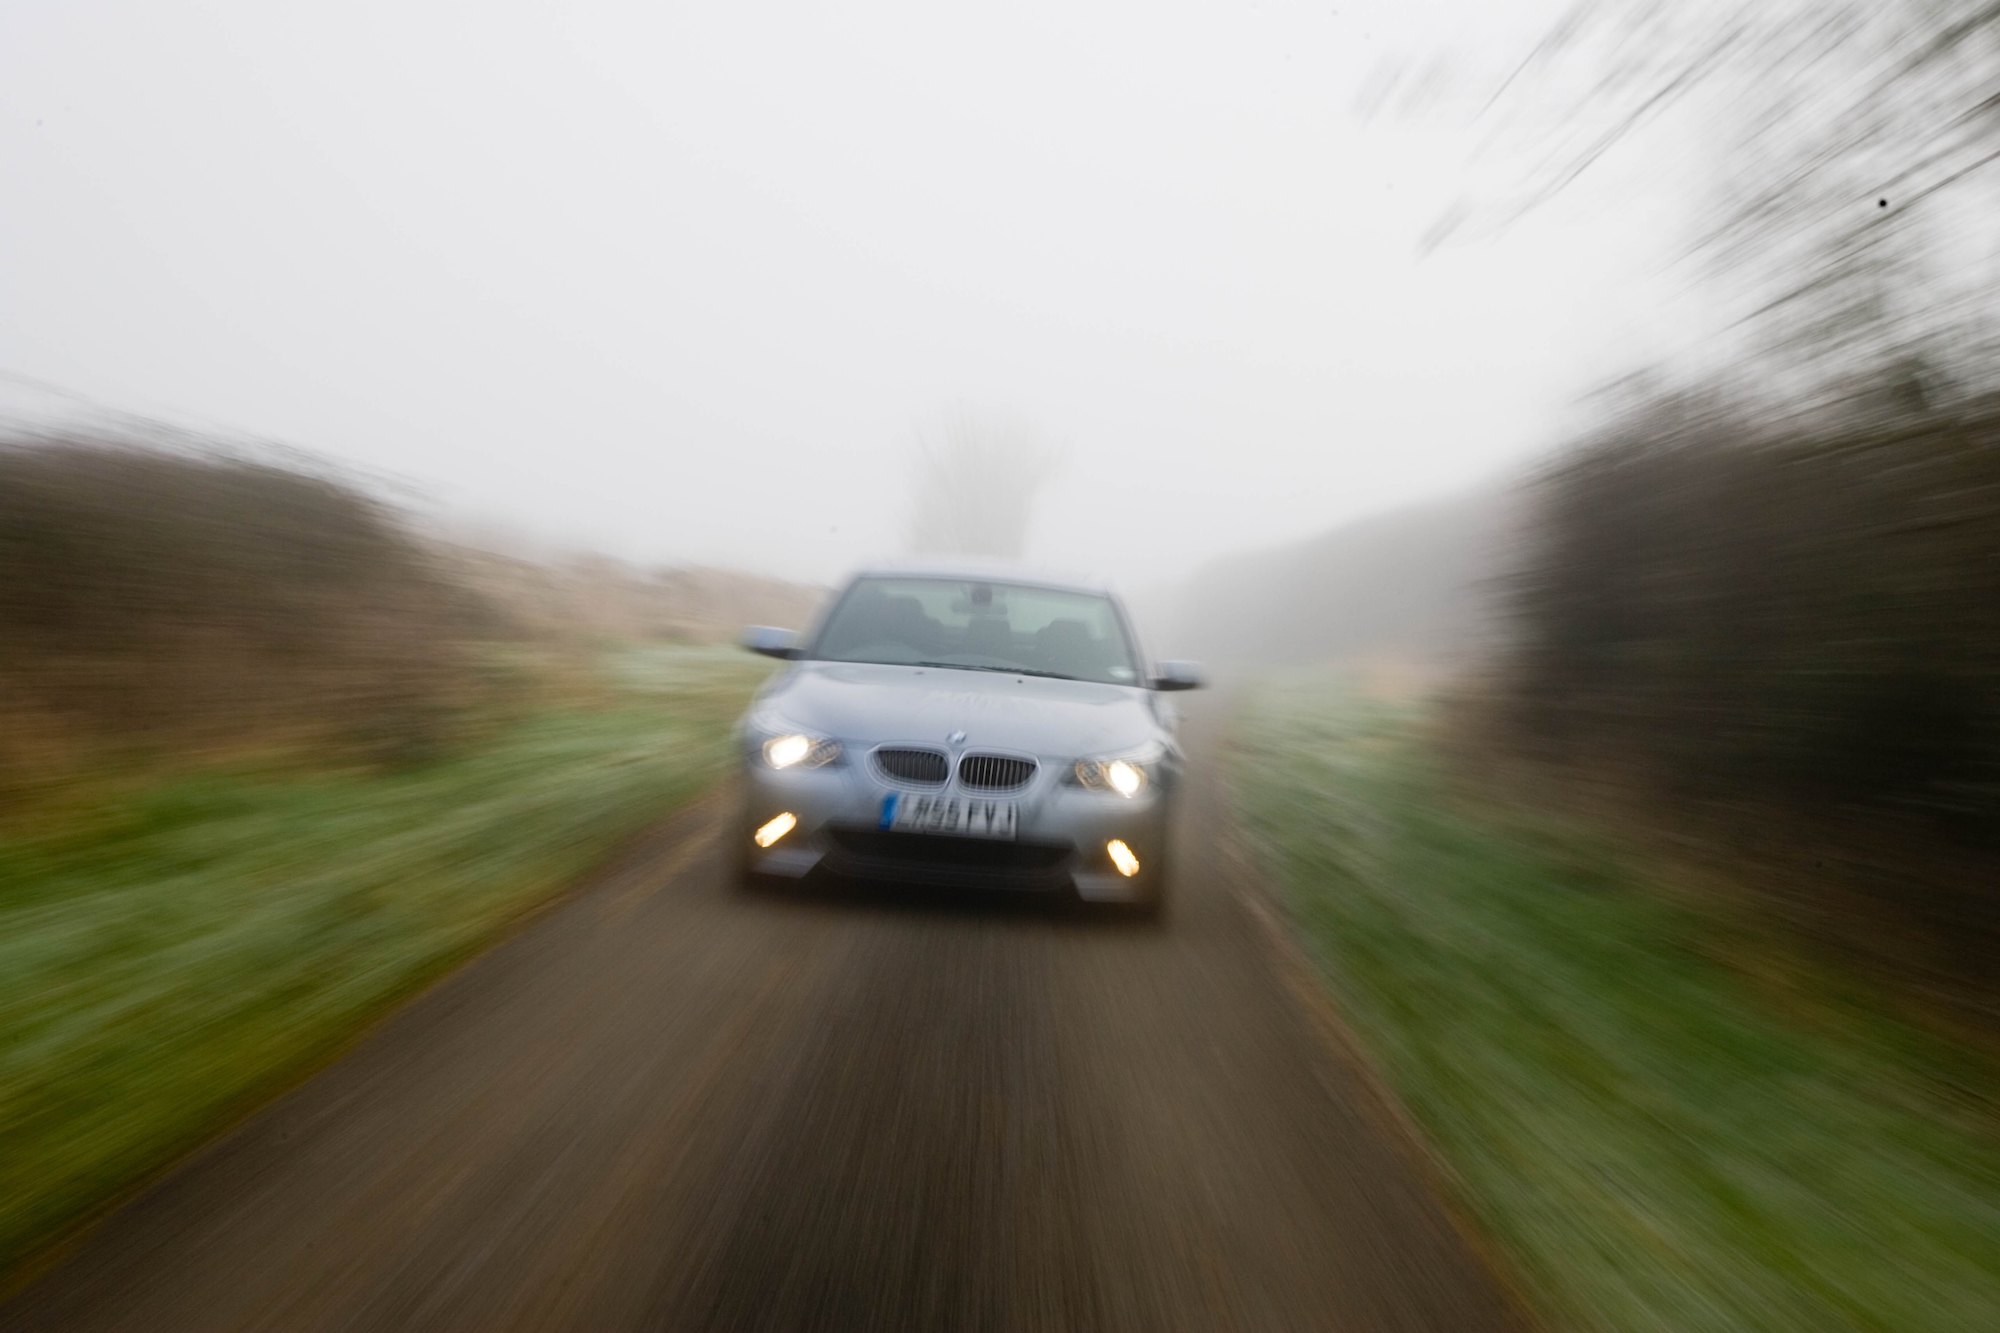 A BMW 5-Series car drives with its headlights illuminated on a country road in foggy weather